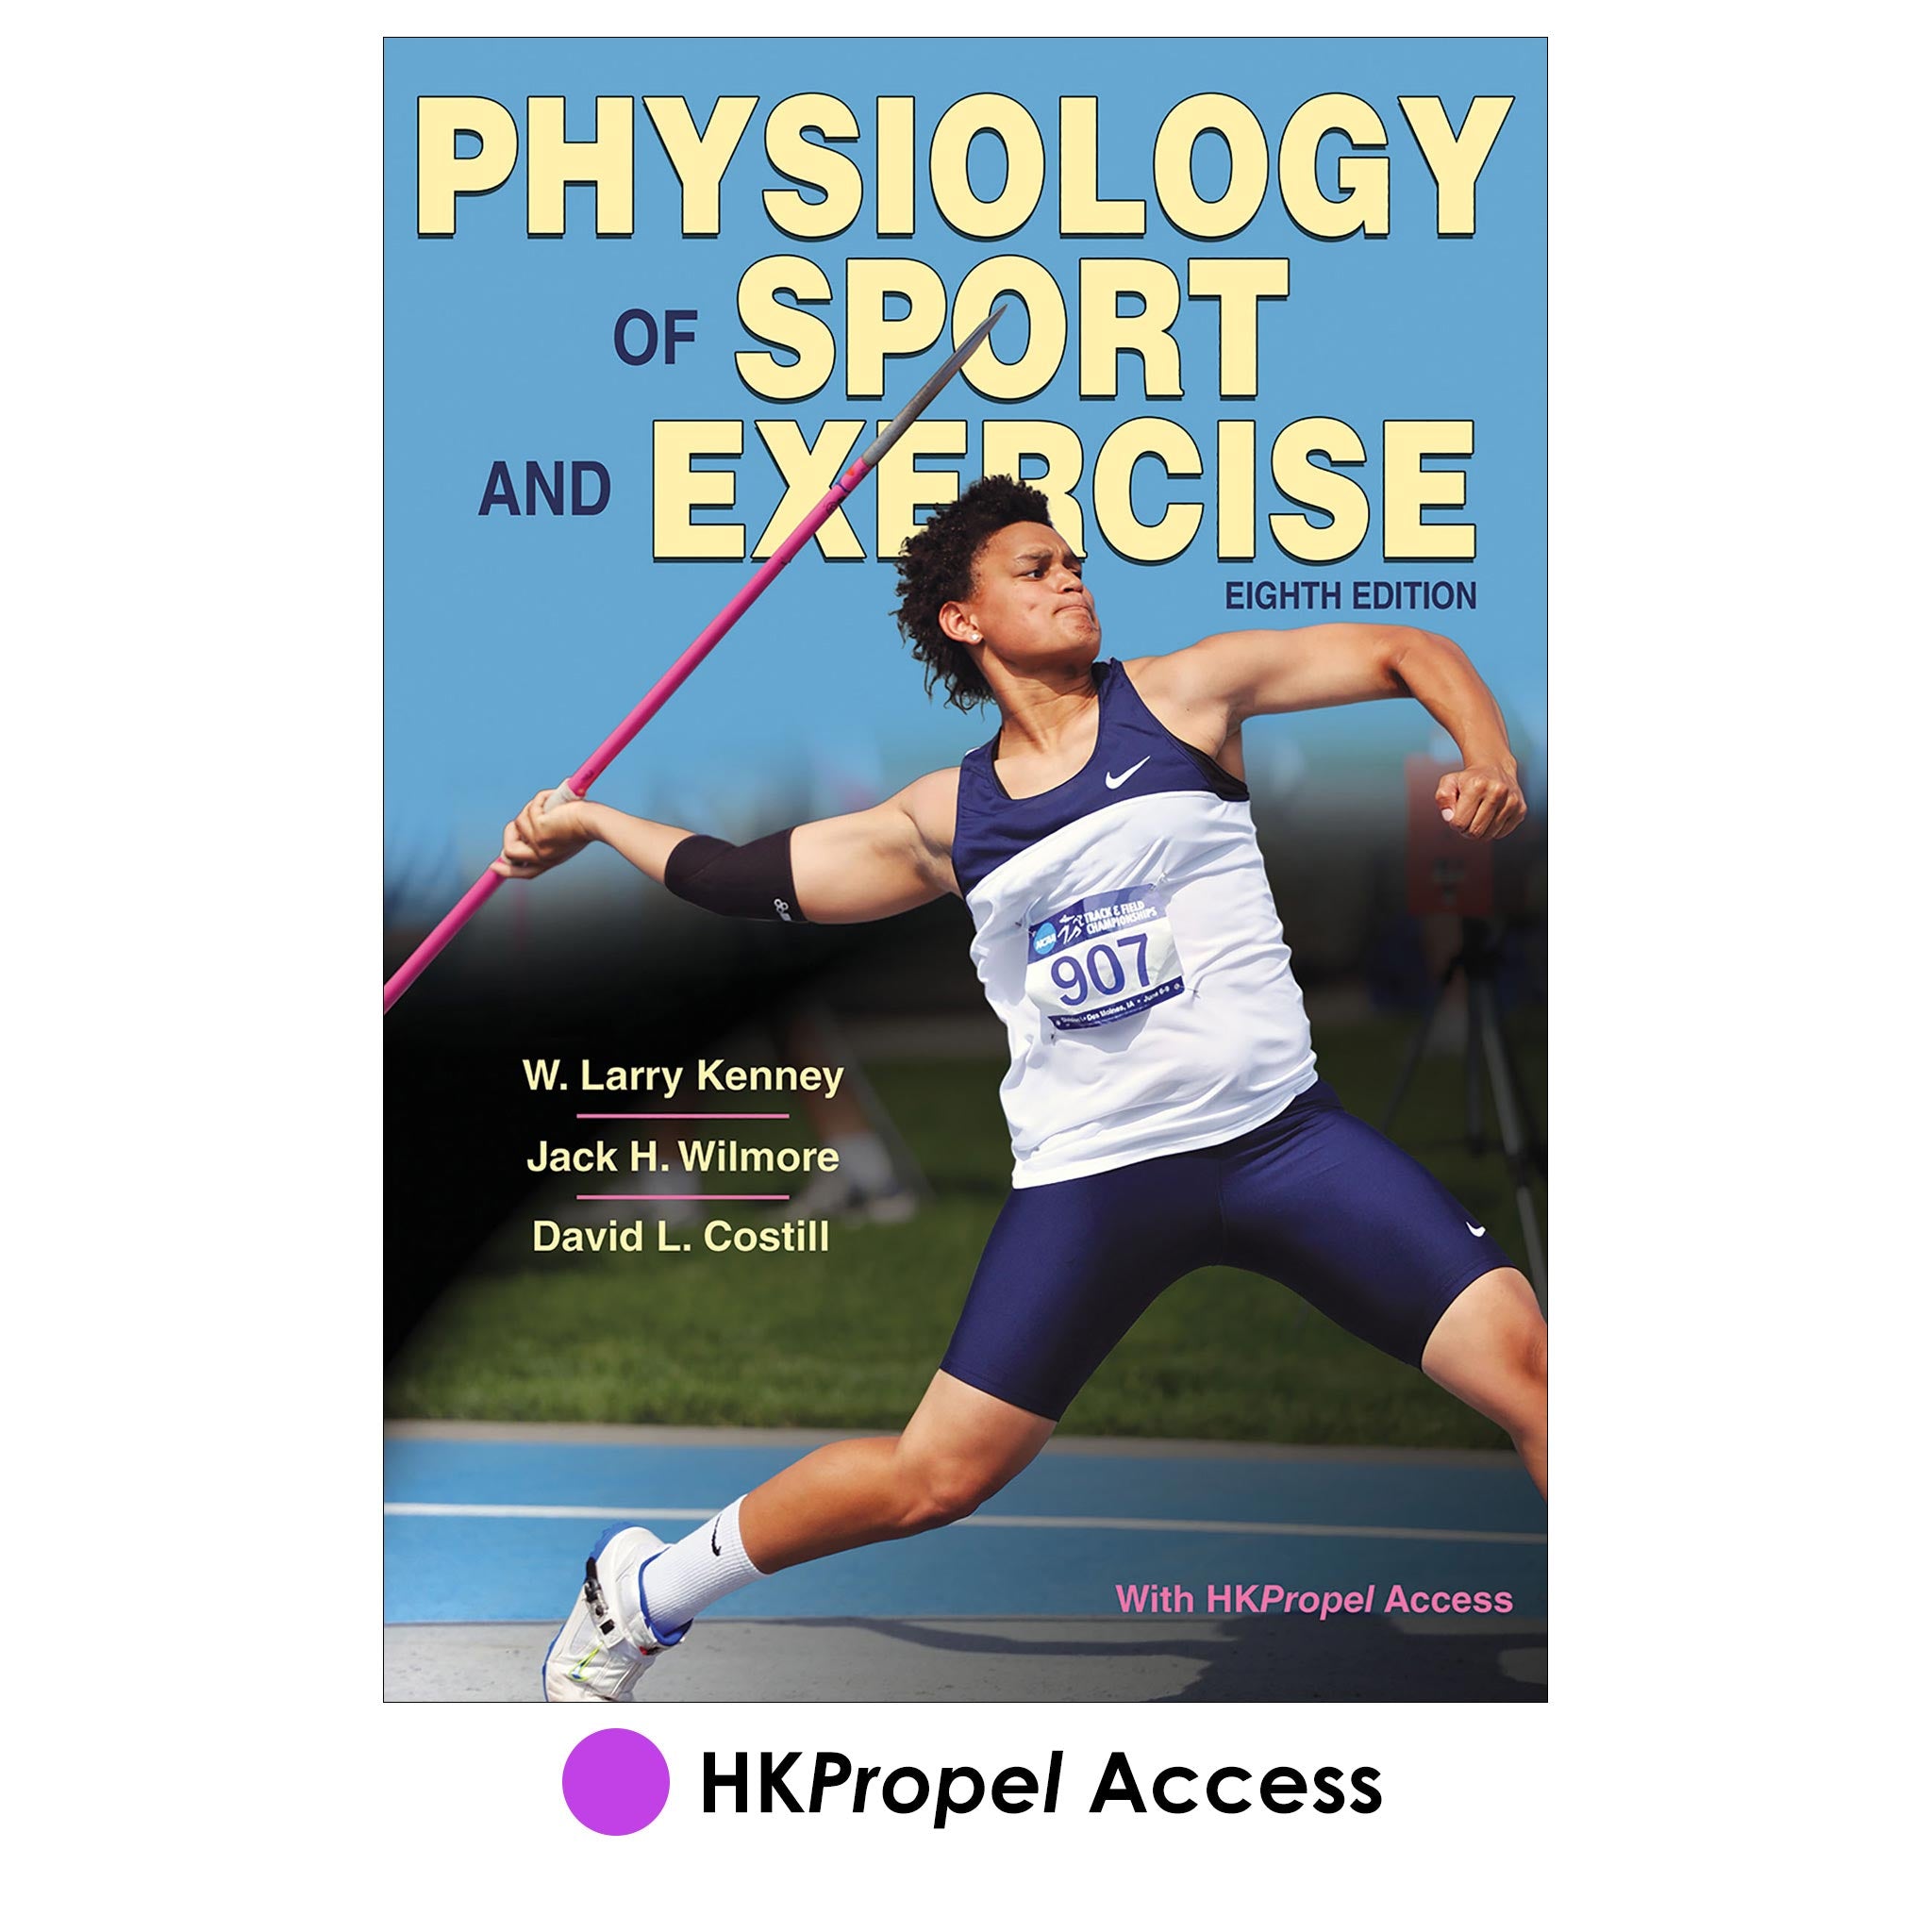 Physiology of Sport and Exercise 8th Edition With HKPropel Access